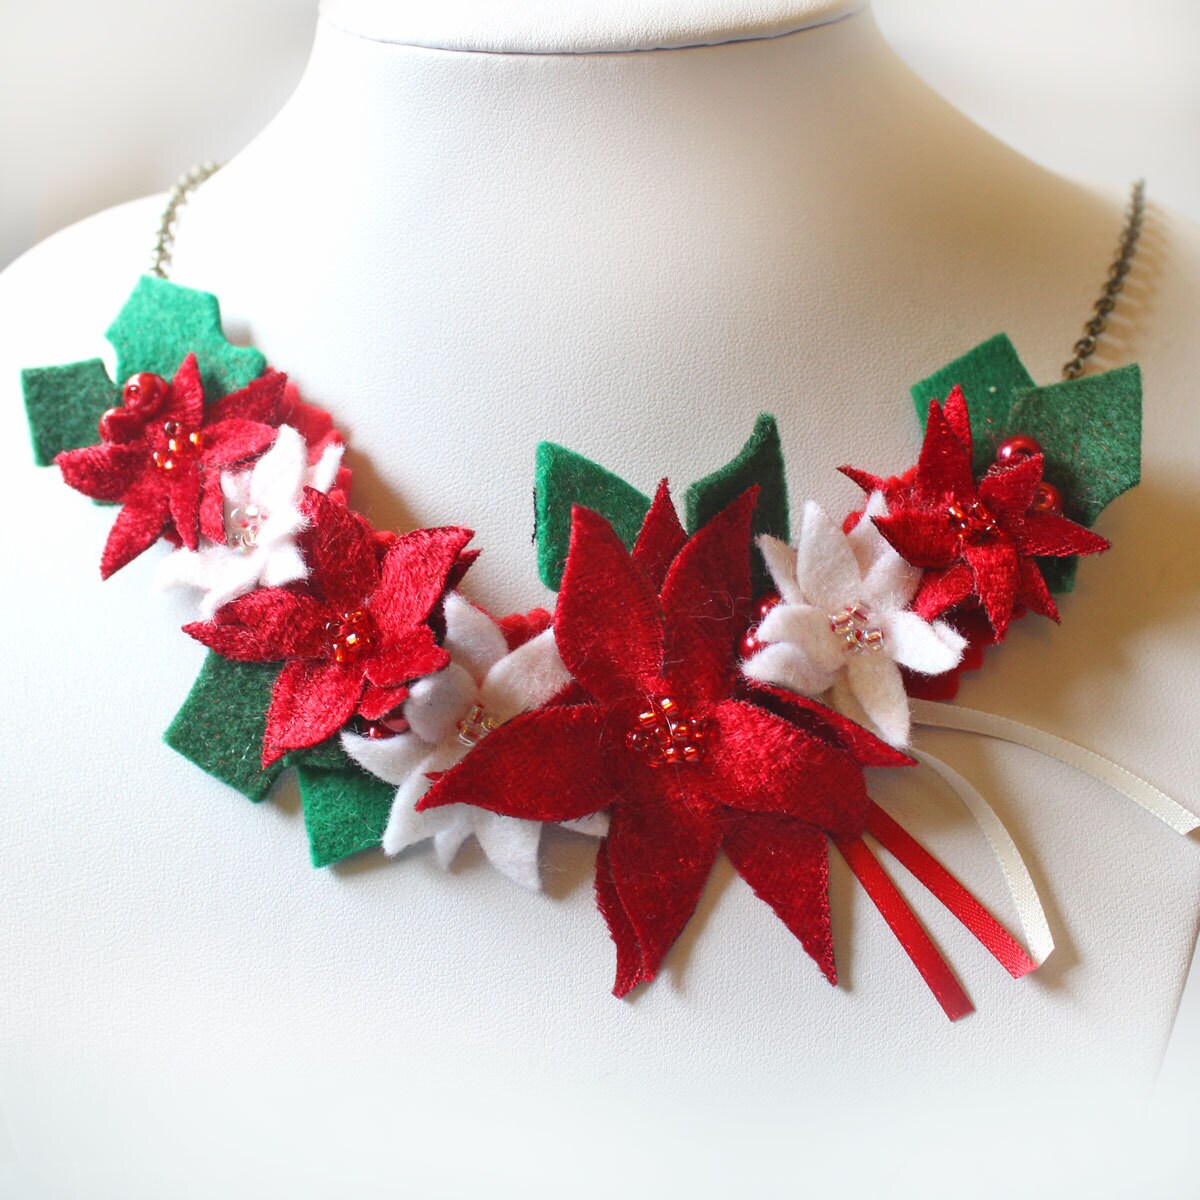 Poinsettia Necklace, Christmas Necklace With White & Red Poinsettia, Holly Leaves & Berries, Fabric Flowers, Festive Fashion Jewelry